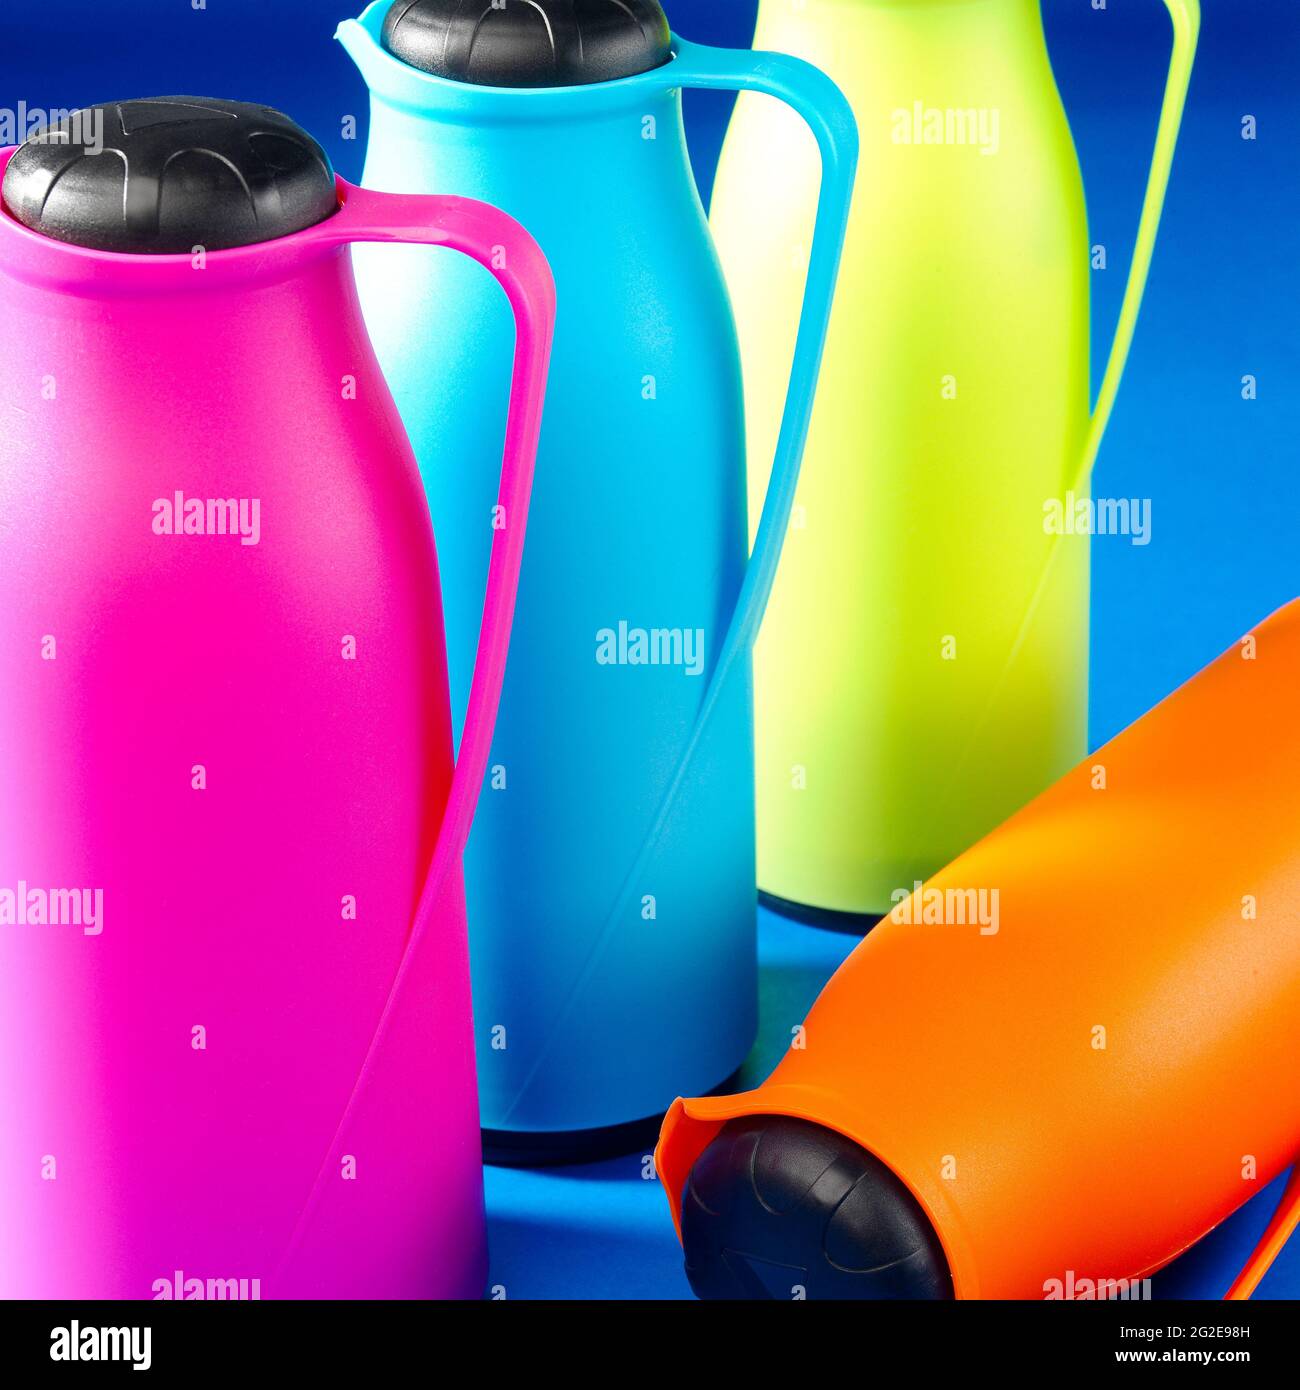 Colorful containers to keep drinks hot or cold. Stock Photo